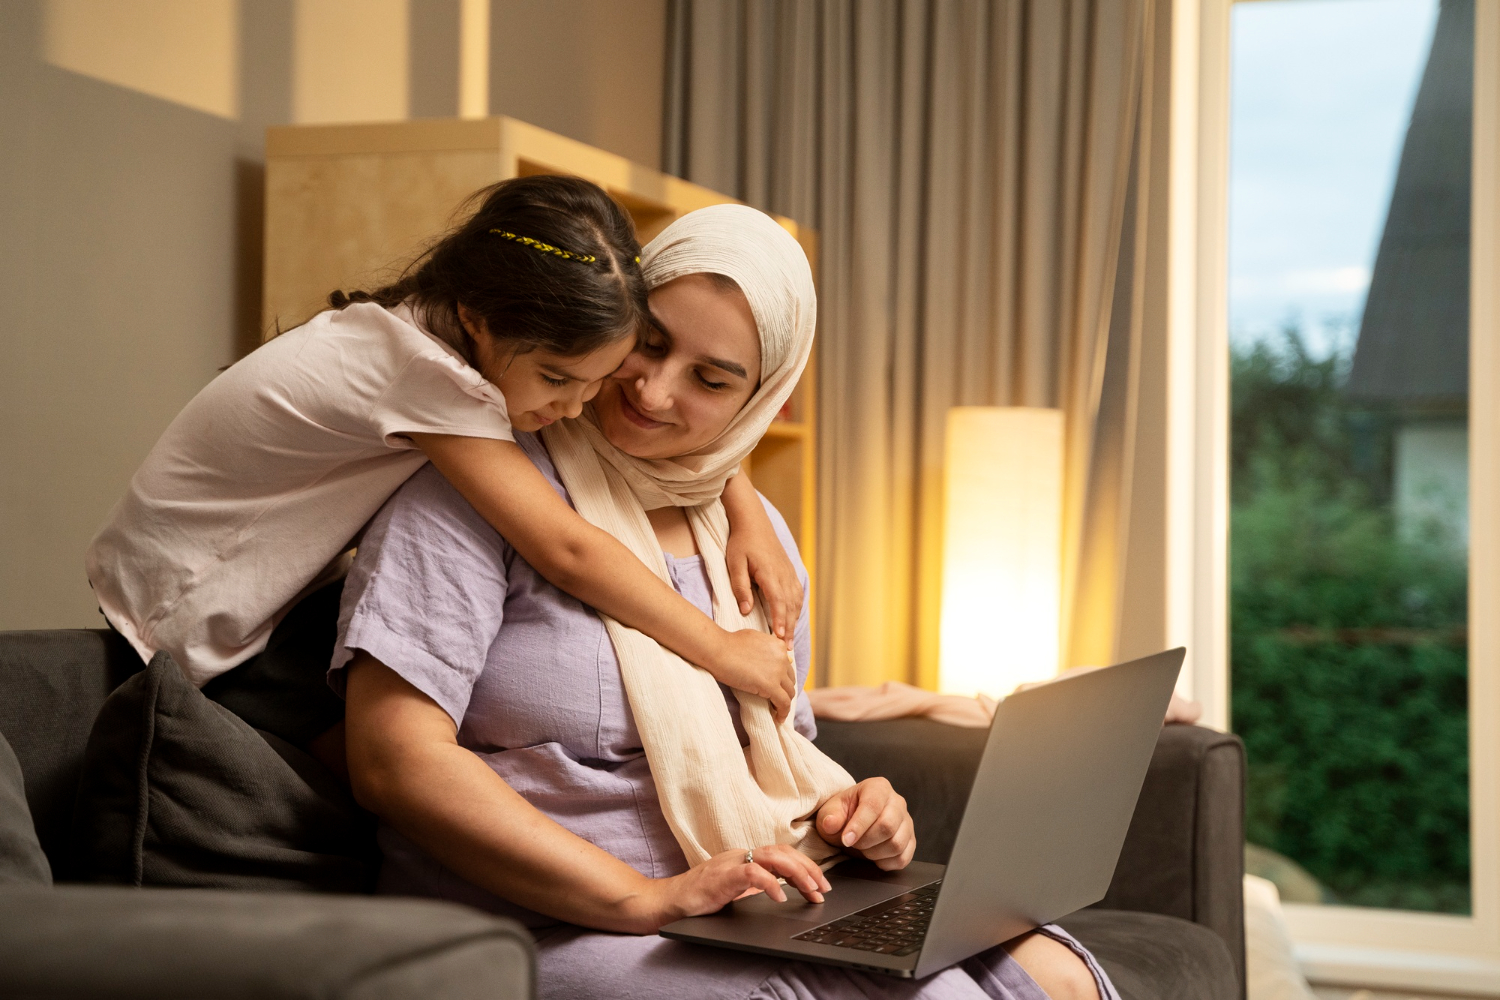 An Arab woman sits on a sofa with a laptop in her arms and is studying something, with a little girl hugging her from behind.